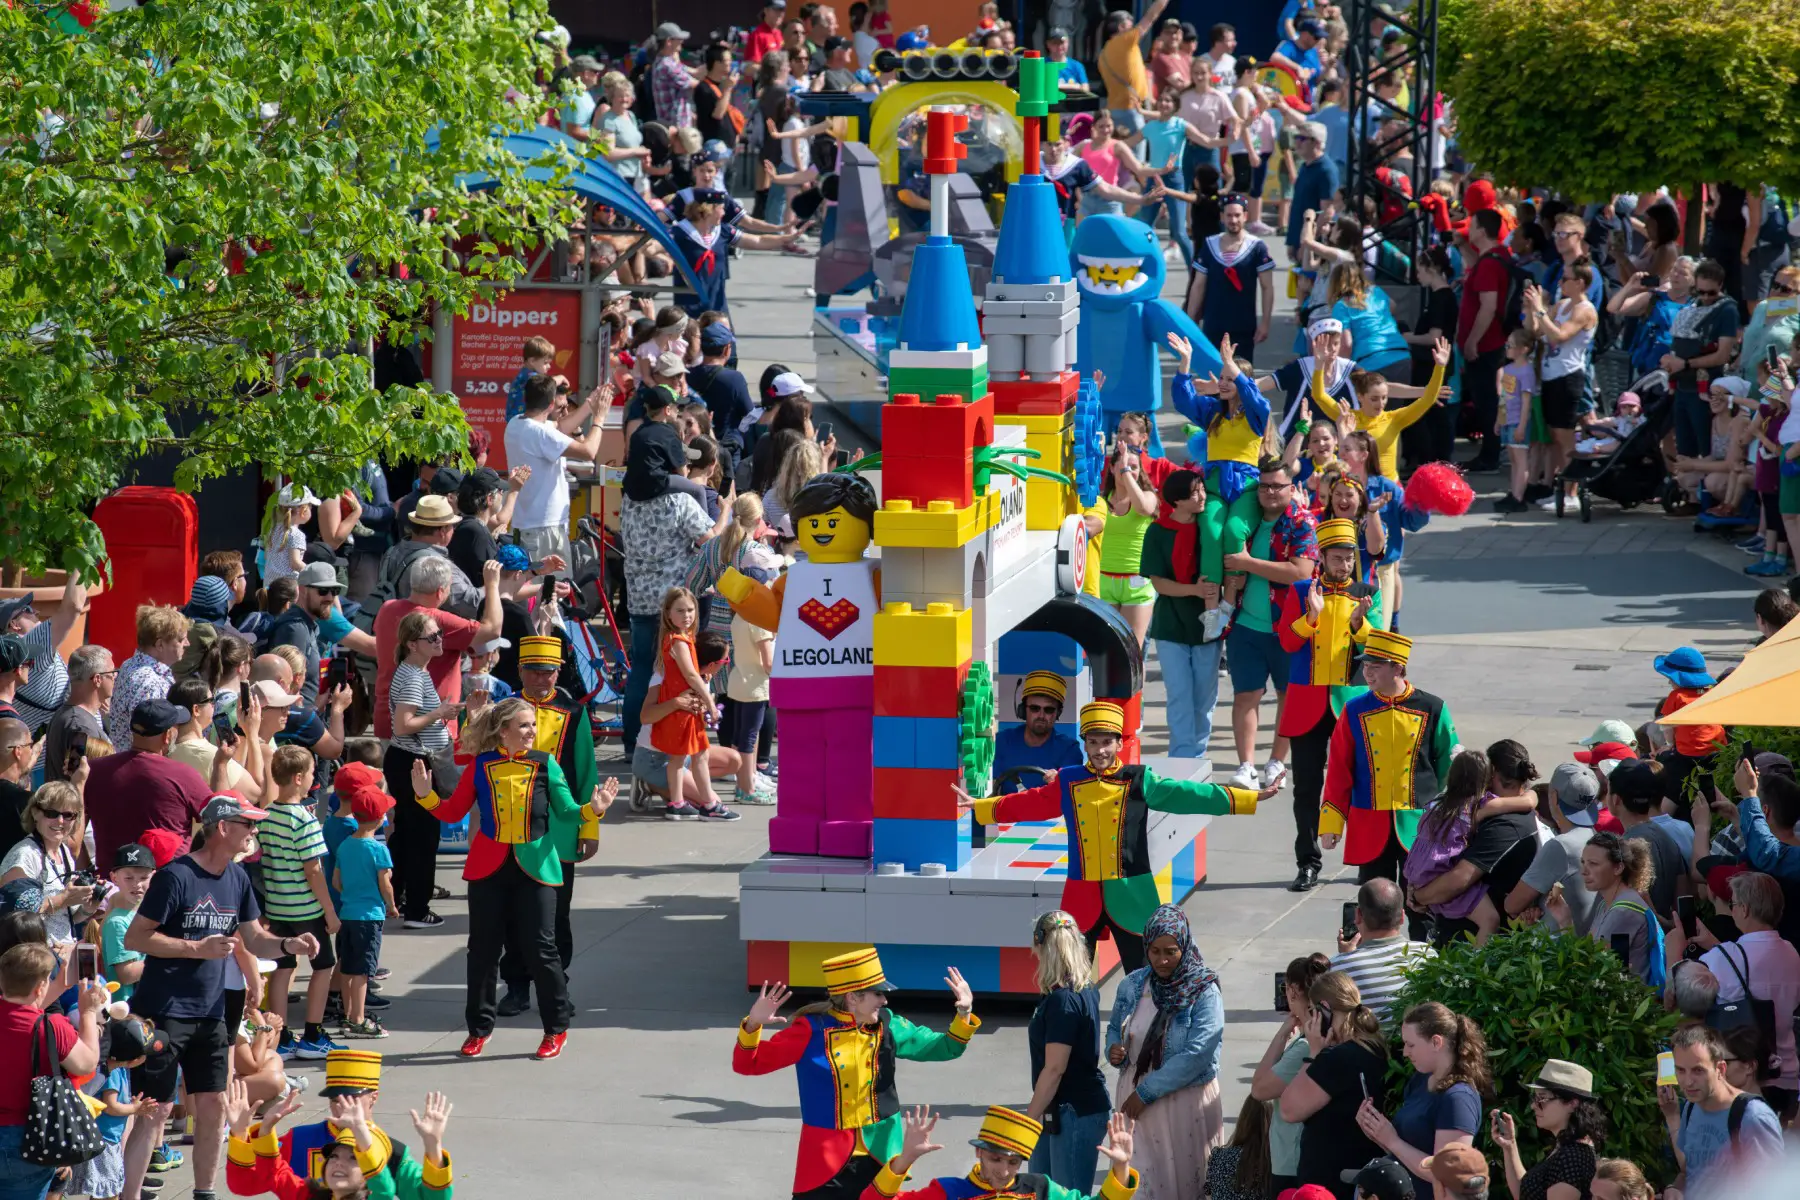 a parade of colorful characters walking through Legoland with crowds cheering on either side